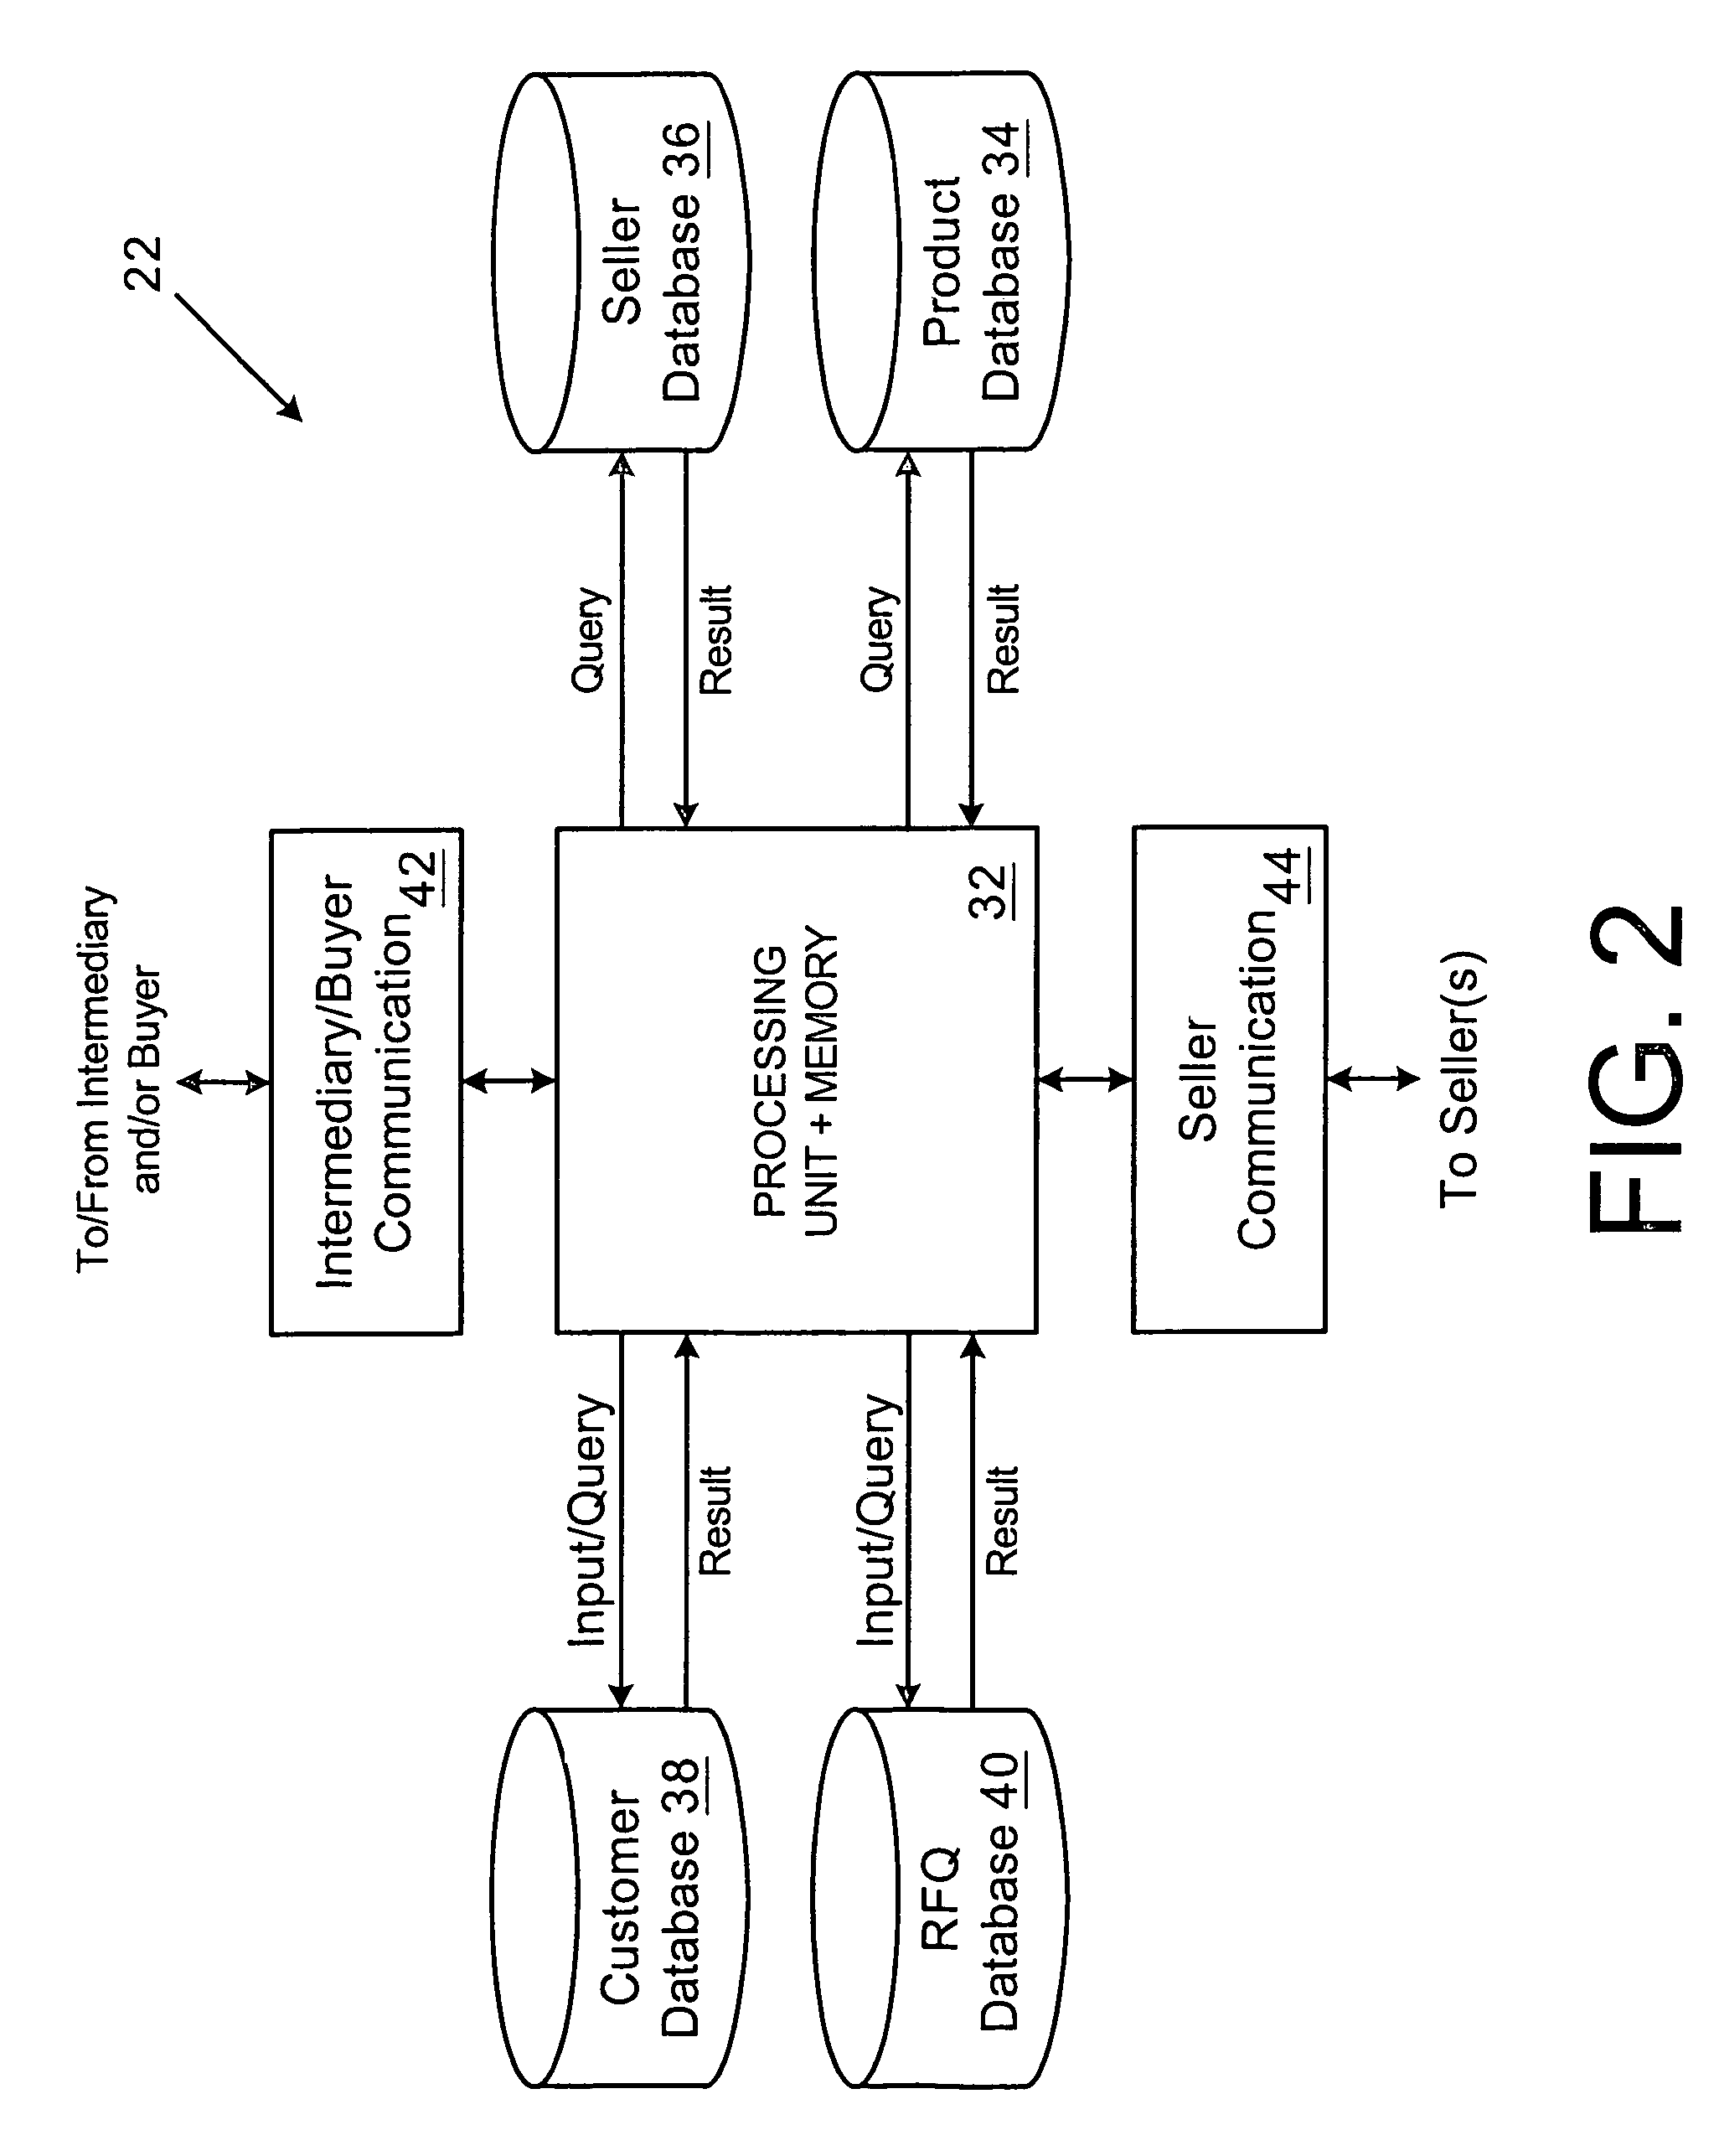 Hierarchical data structure for vehicle identification and configuration data including protected customer data